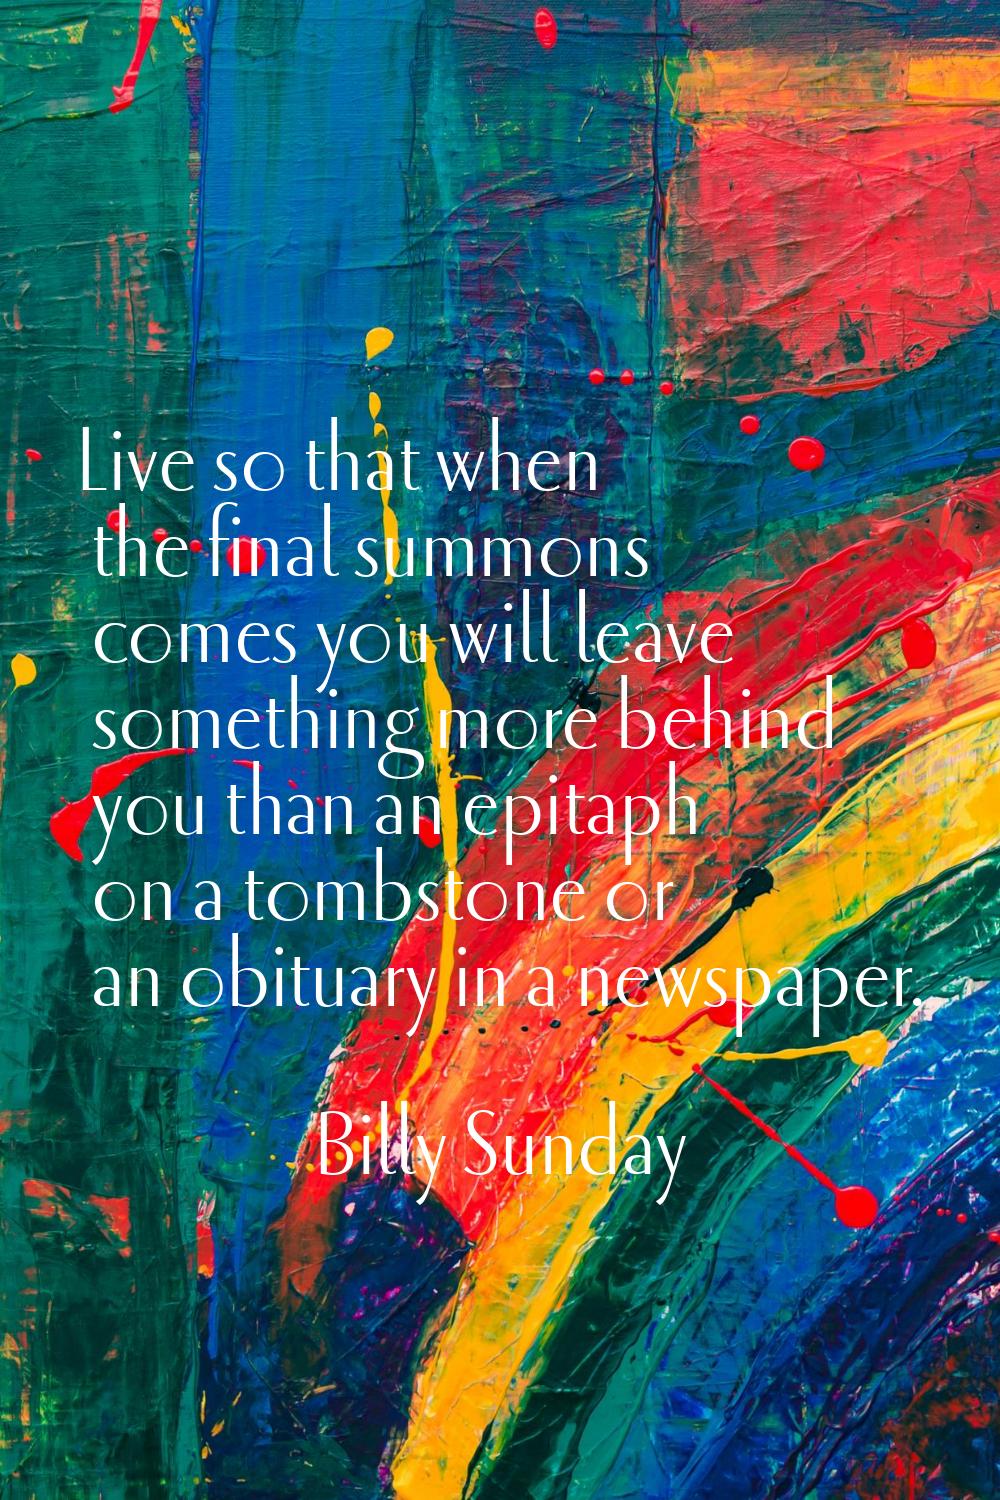 Live so that when the final summons comes you will leave something more behind you than an epitaph 